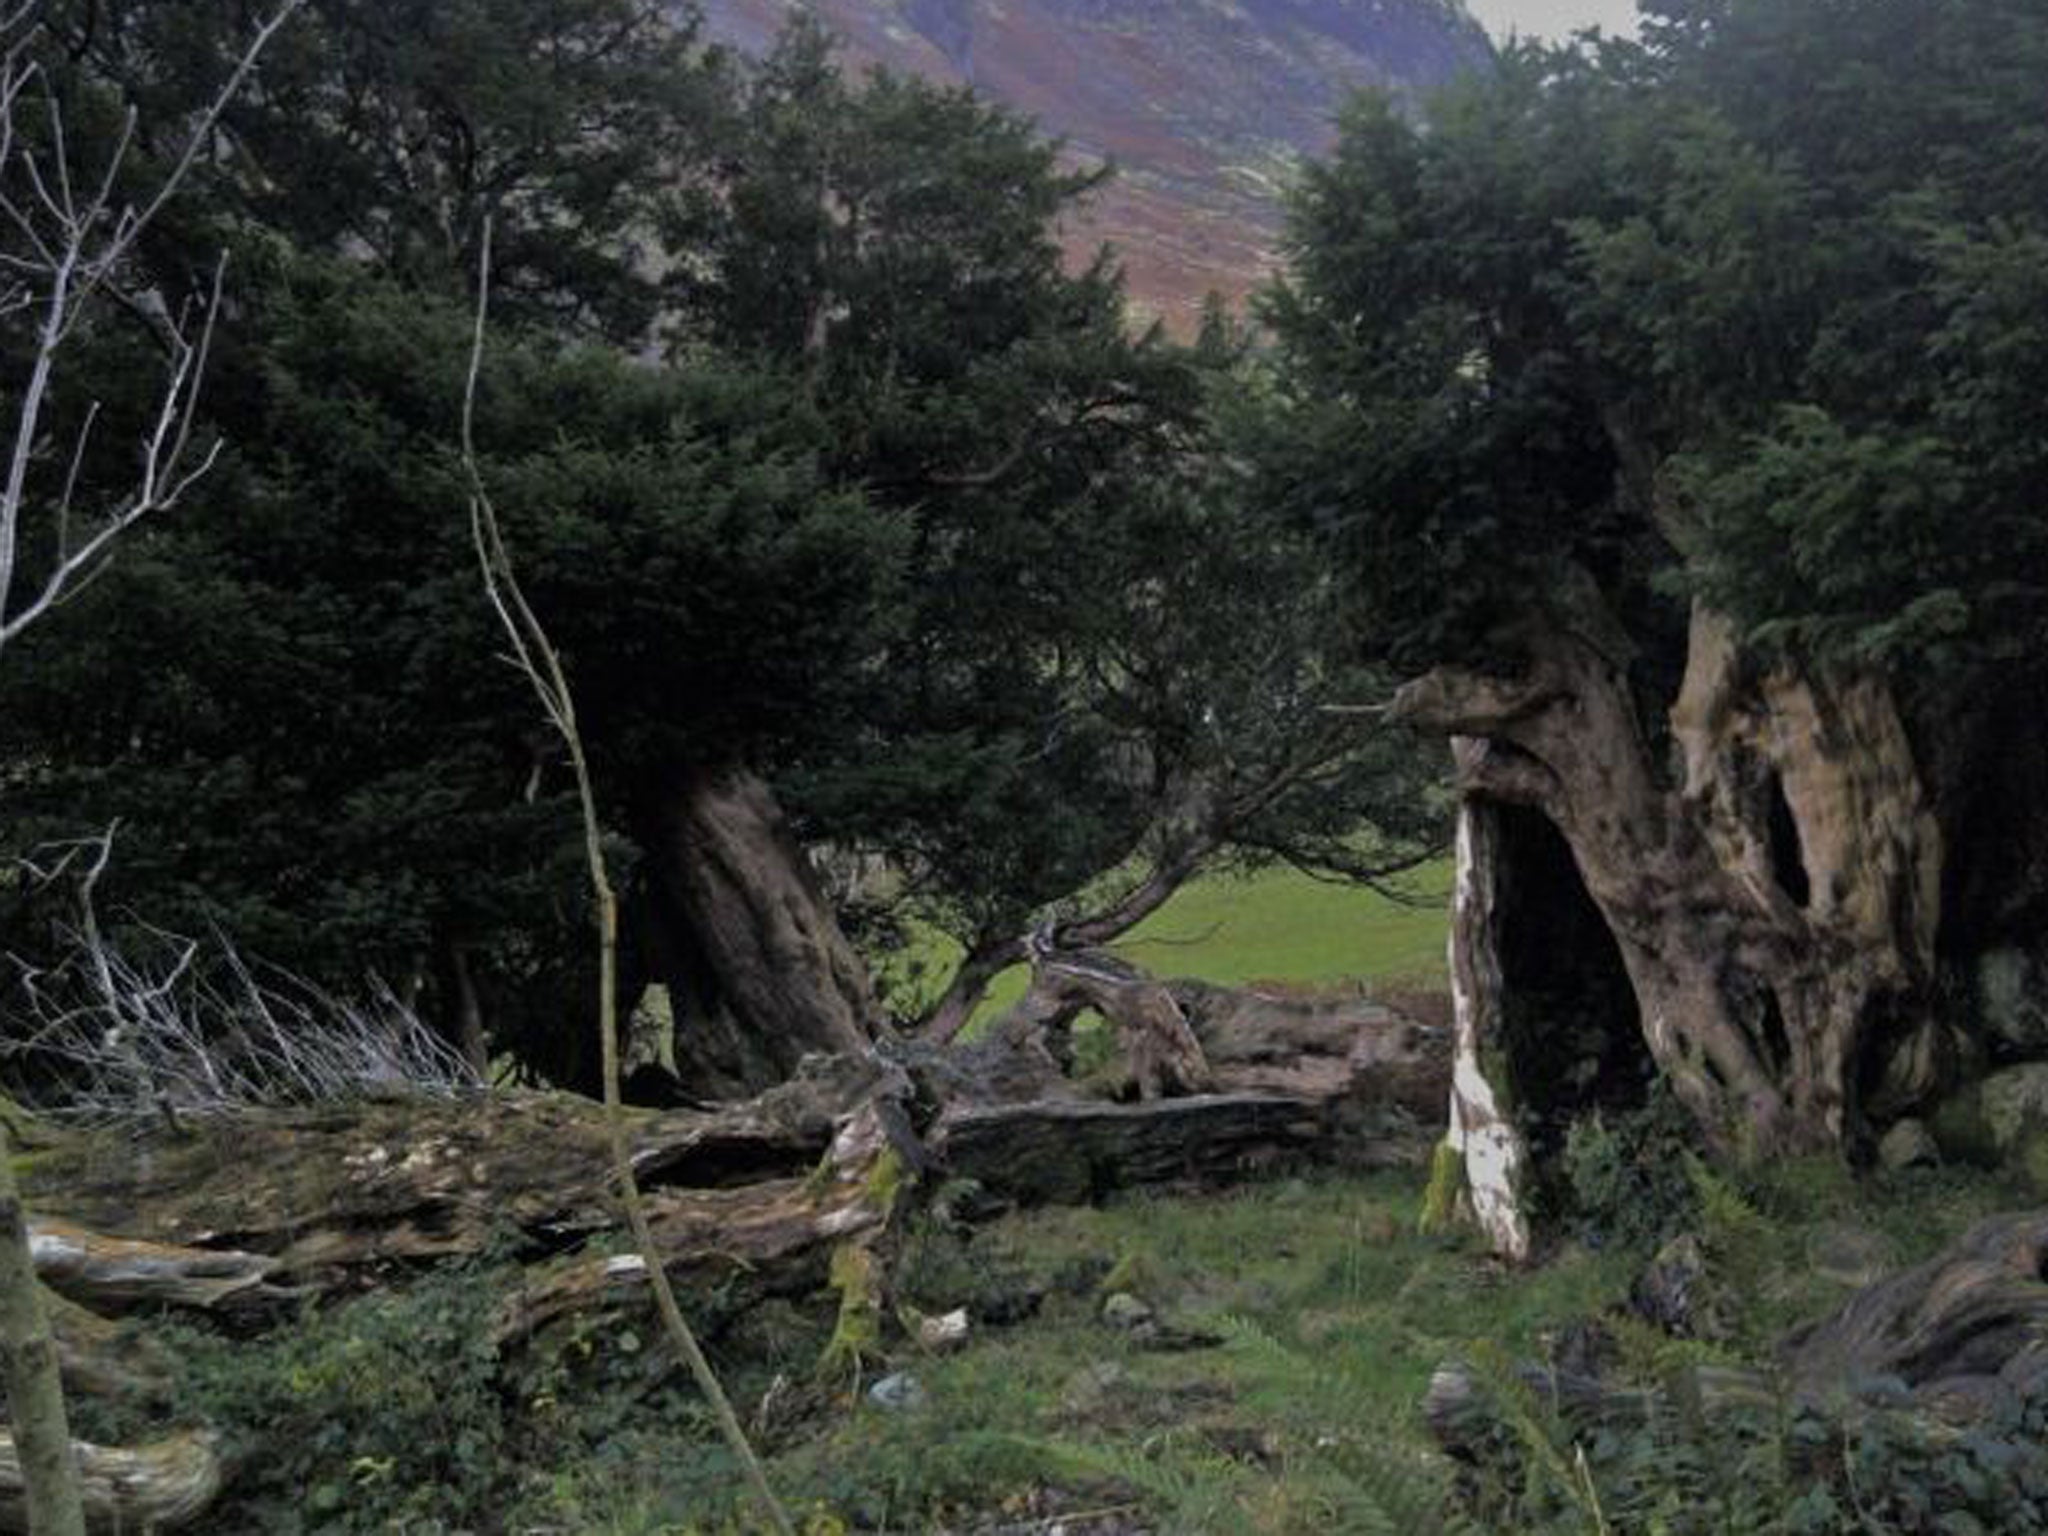 Here’s looking at yew: the Borrowdale trees